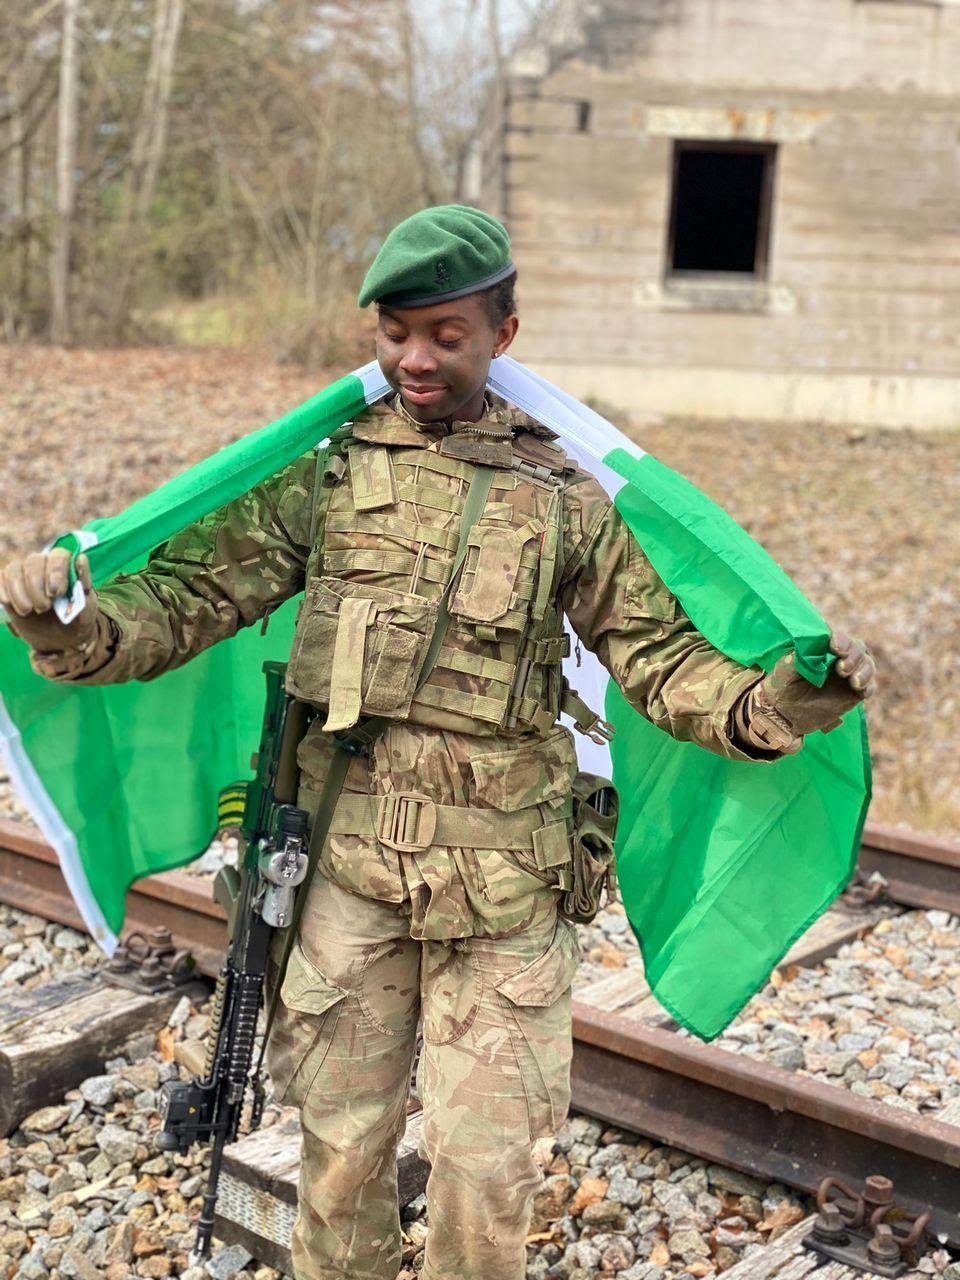 Princess Owowoh becomes first Nigerian female officer cadet to graduate from UK’s Royal Military Academy